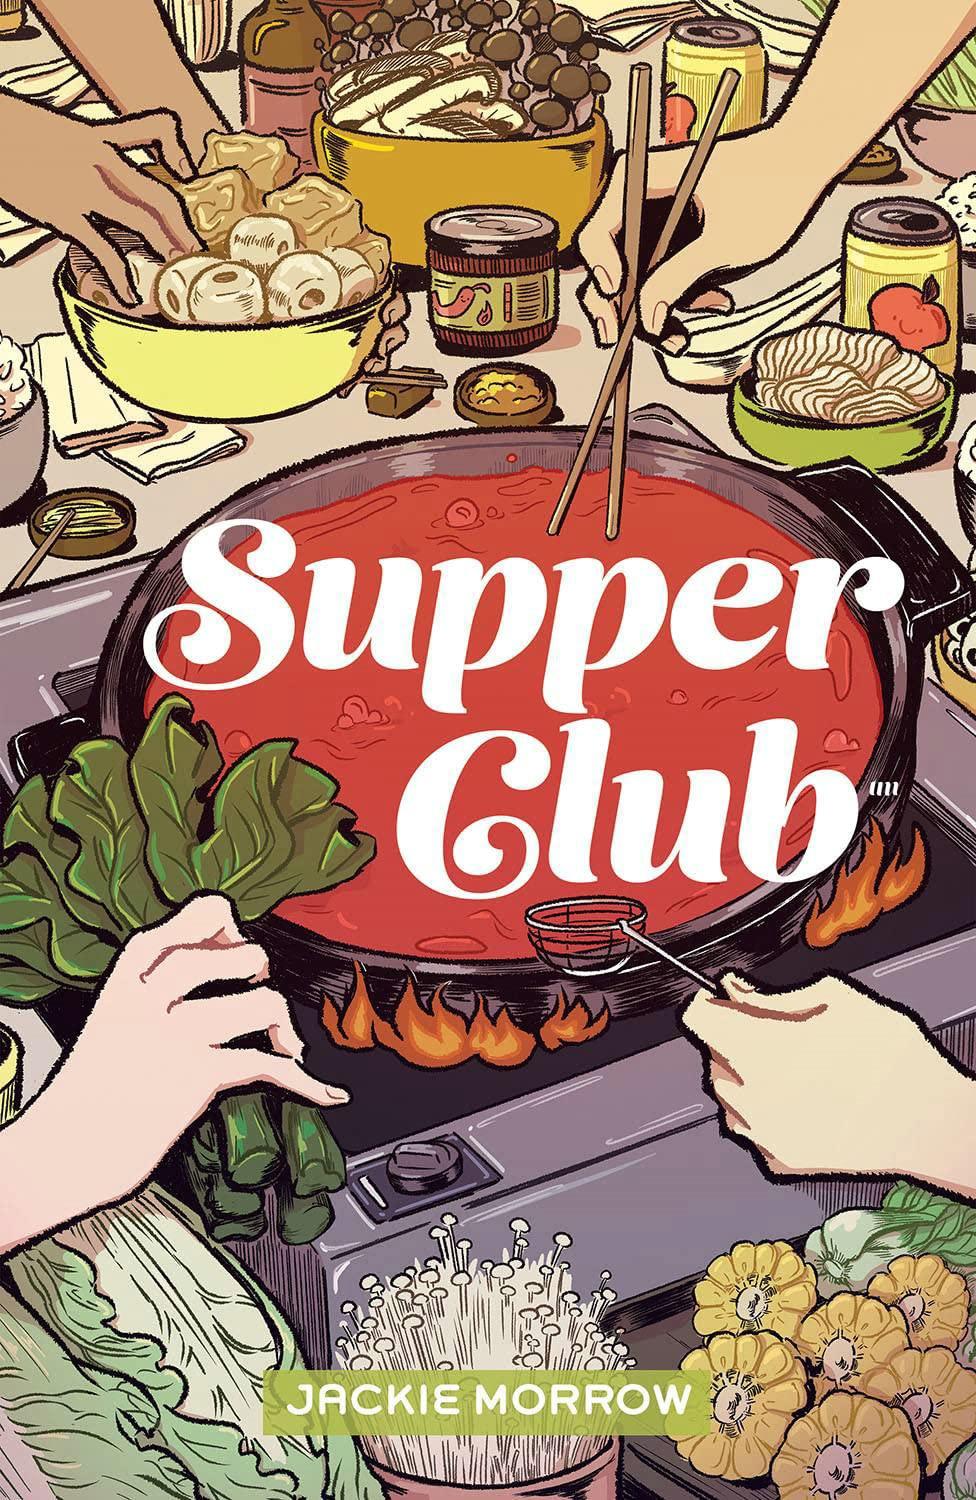 Supper Club - ShopQueer.co